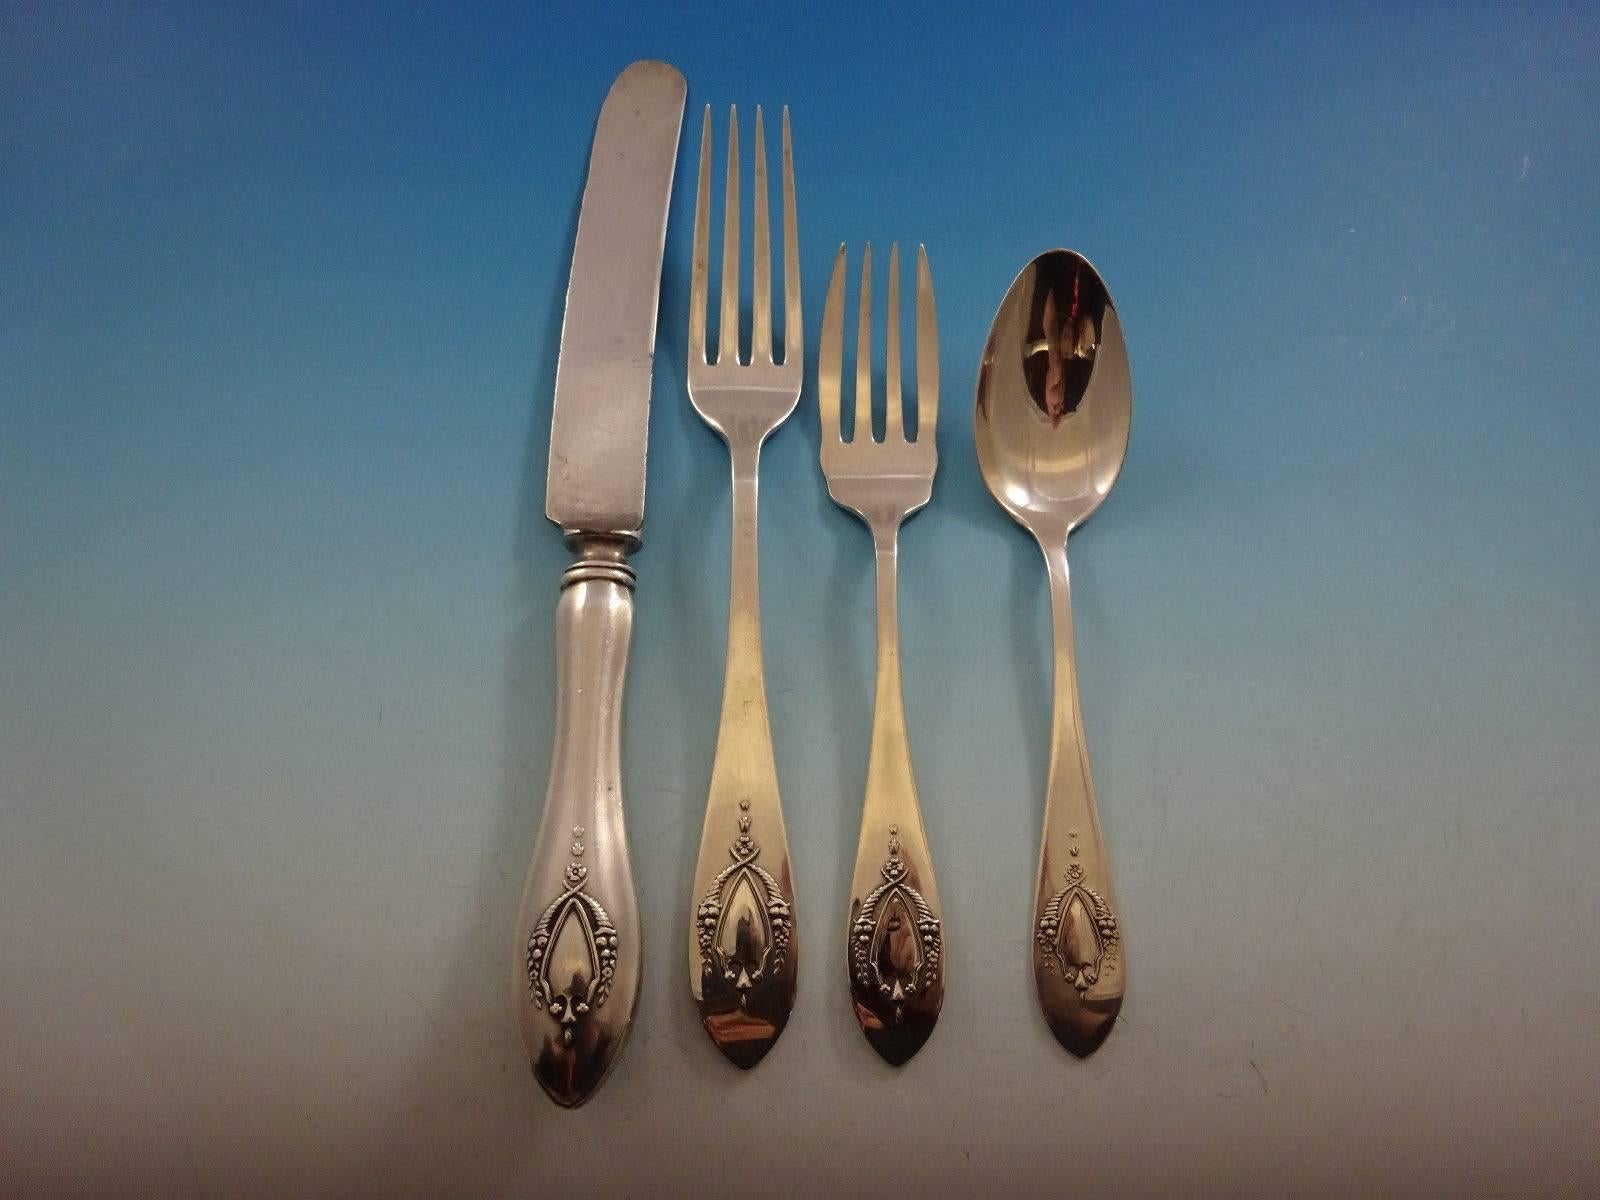 Vintage Mount Vernon by Lunt sterling silver flatware set - 56 pieces. This set includes:

Eight knives, 8 1/4